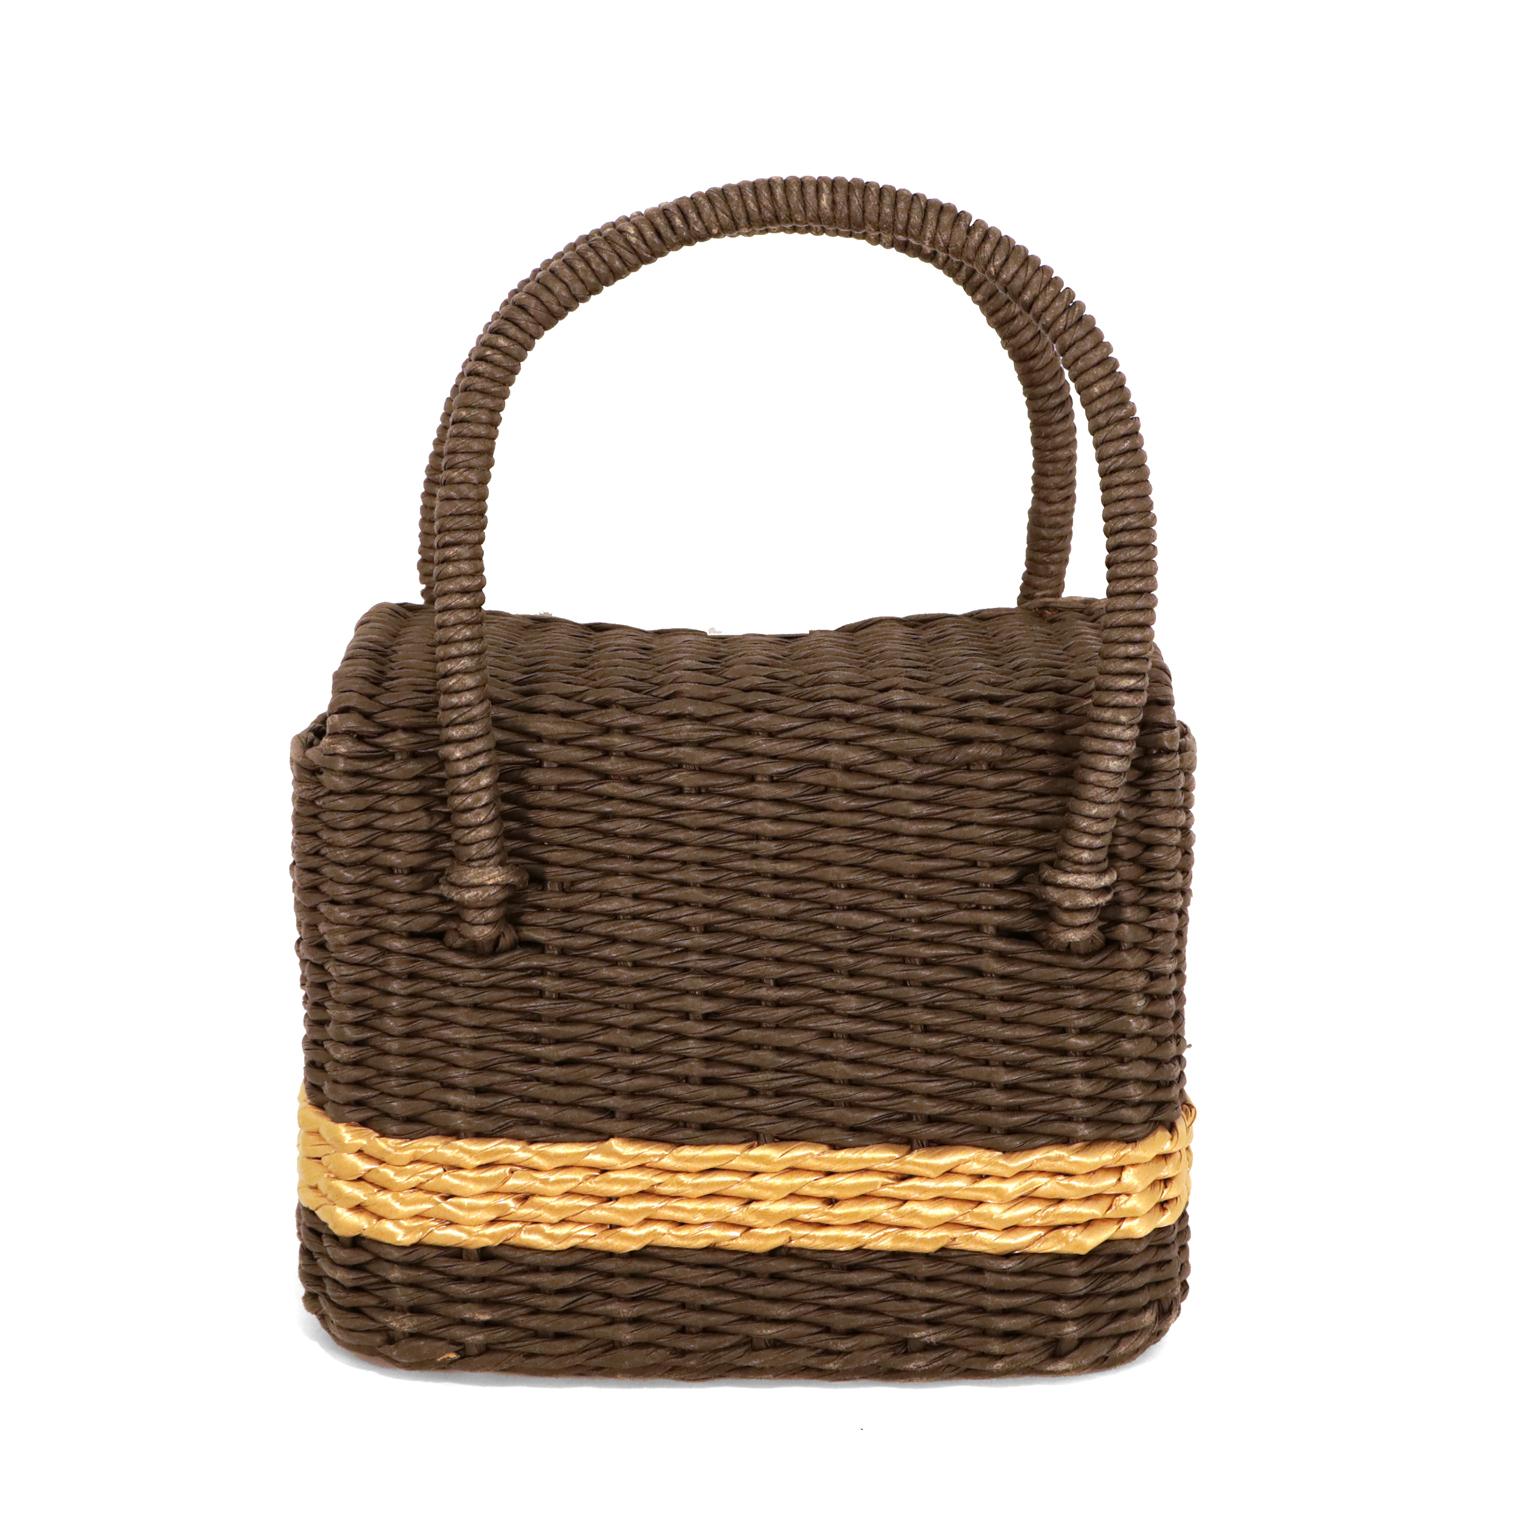 This authentic Chanel Black and Gold Wicker Basket Bag is in excellent condition.  Highly collectible and sought after, this is a rare piece for any collection.  
Black wicker sturdy woven bag has golden banded stripe.  Matte silver tone hardware